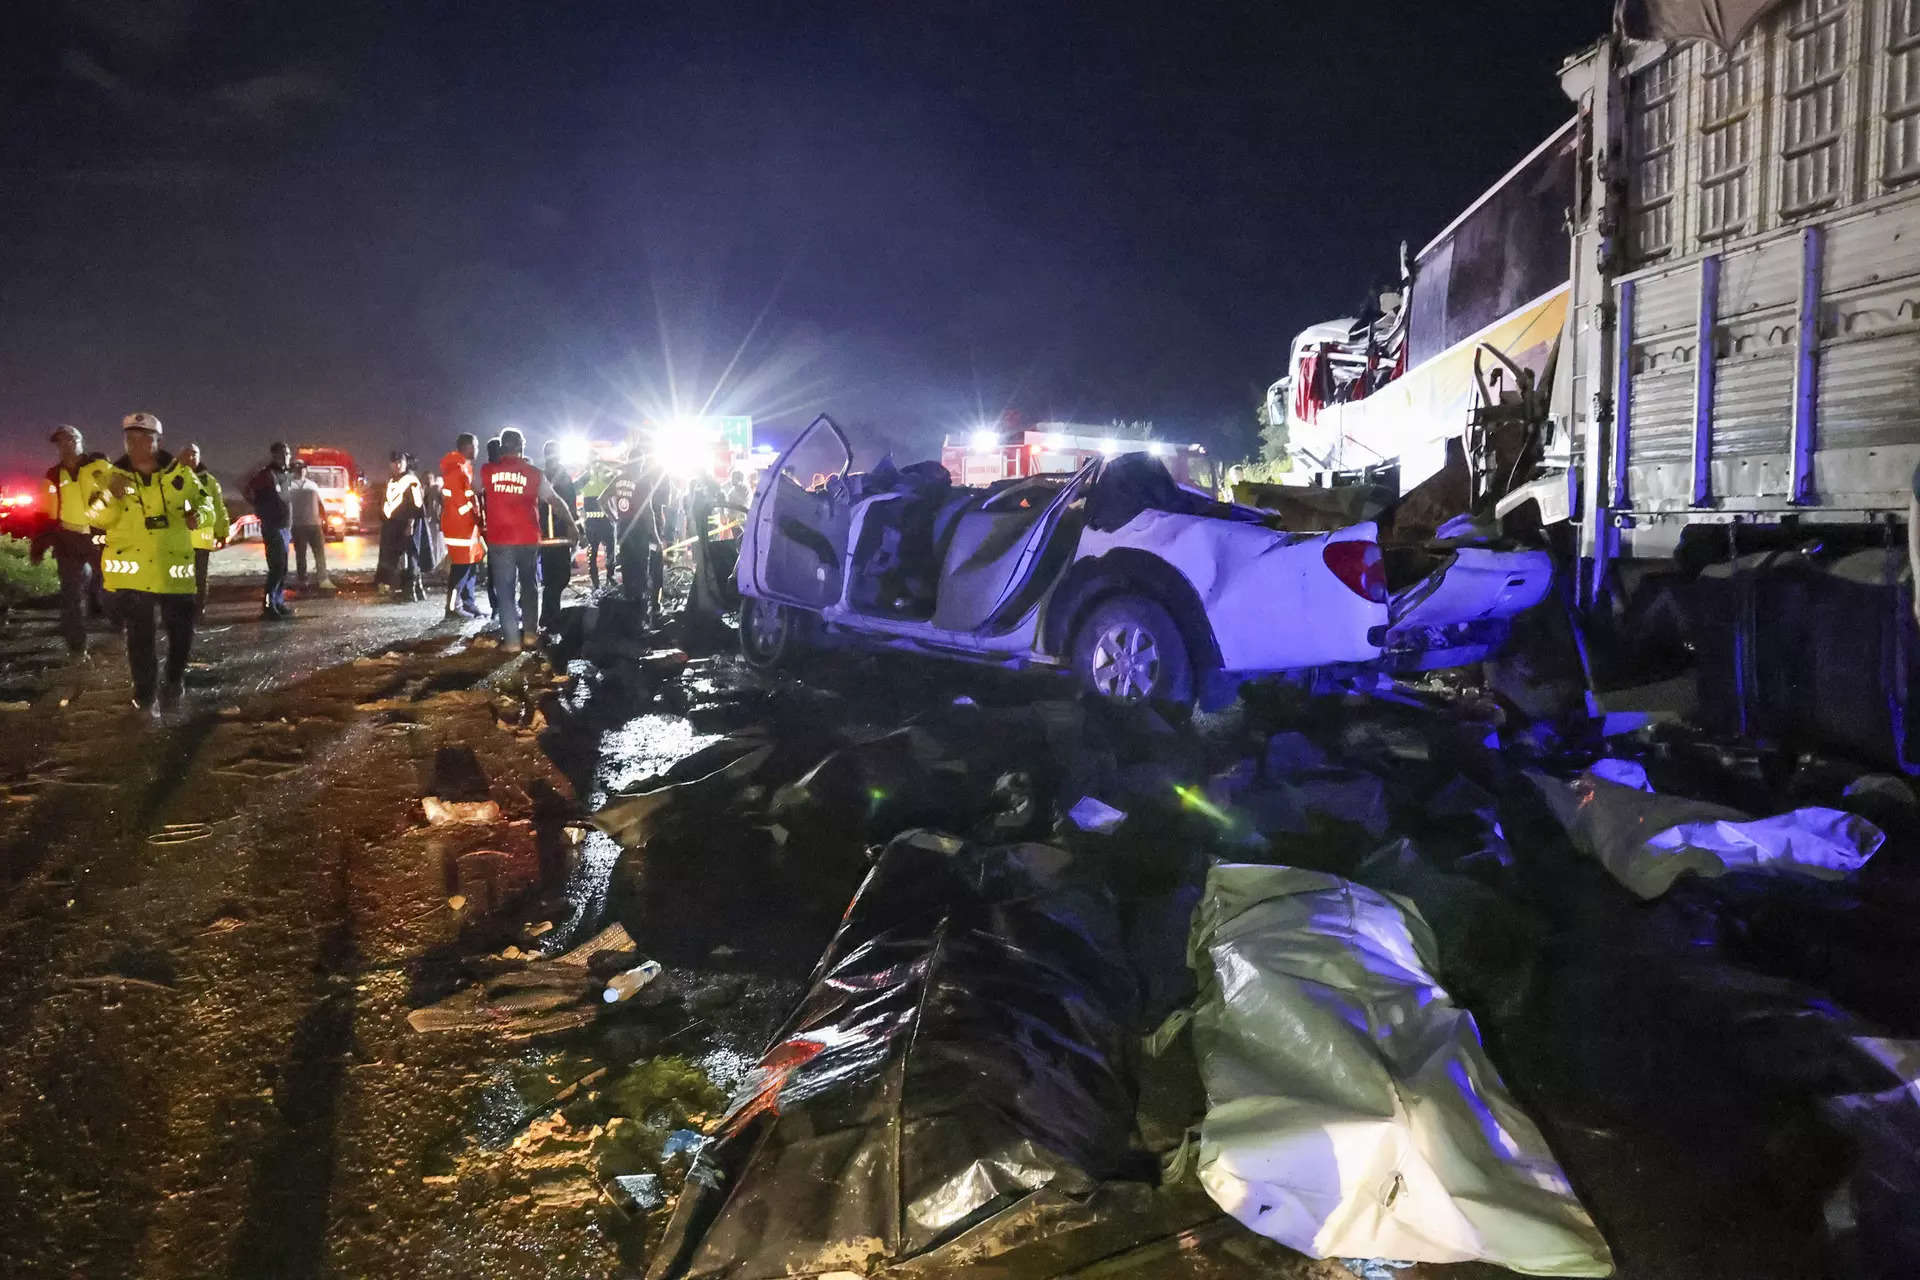 Bus crashes into vehicles in southern Turkey, leaves 10 dead and 39 injured